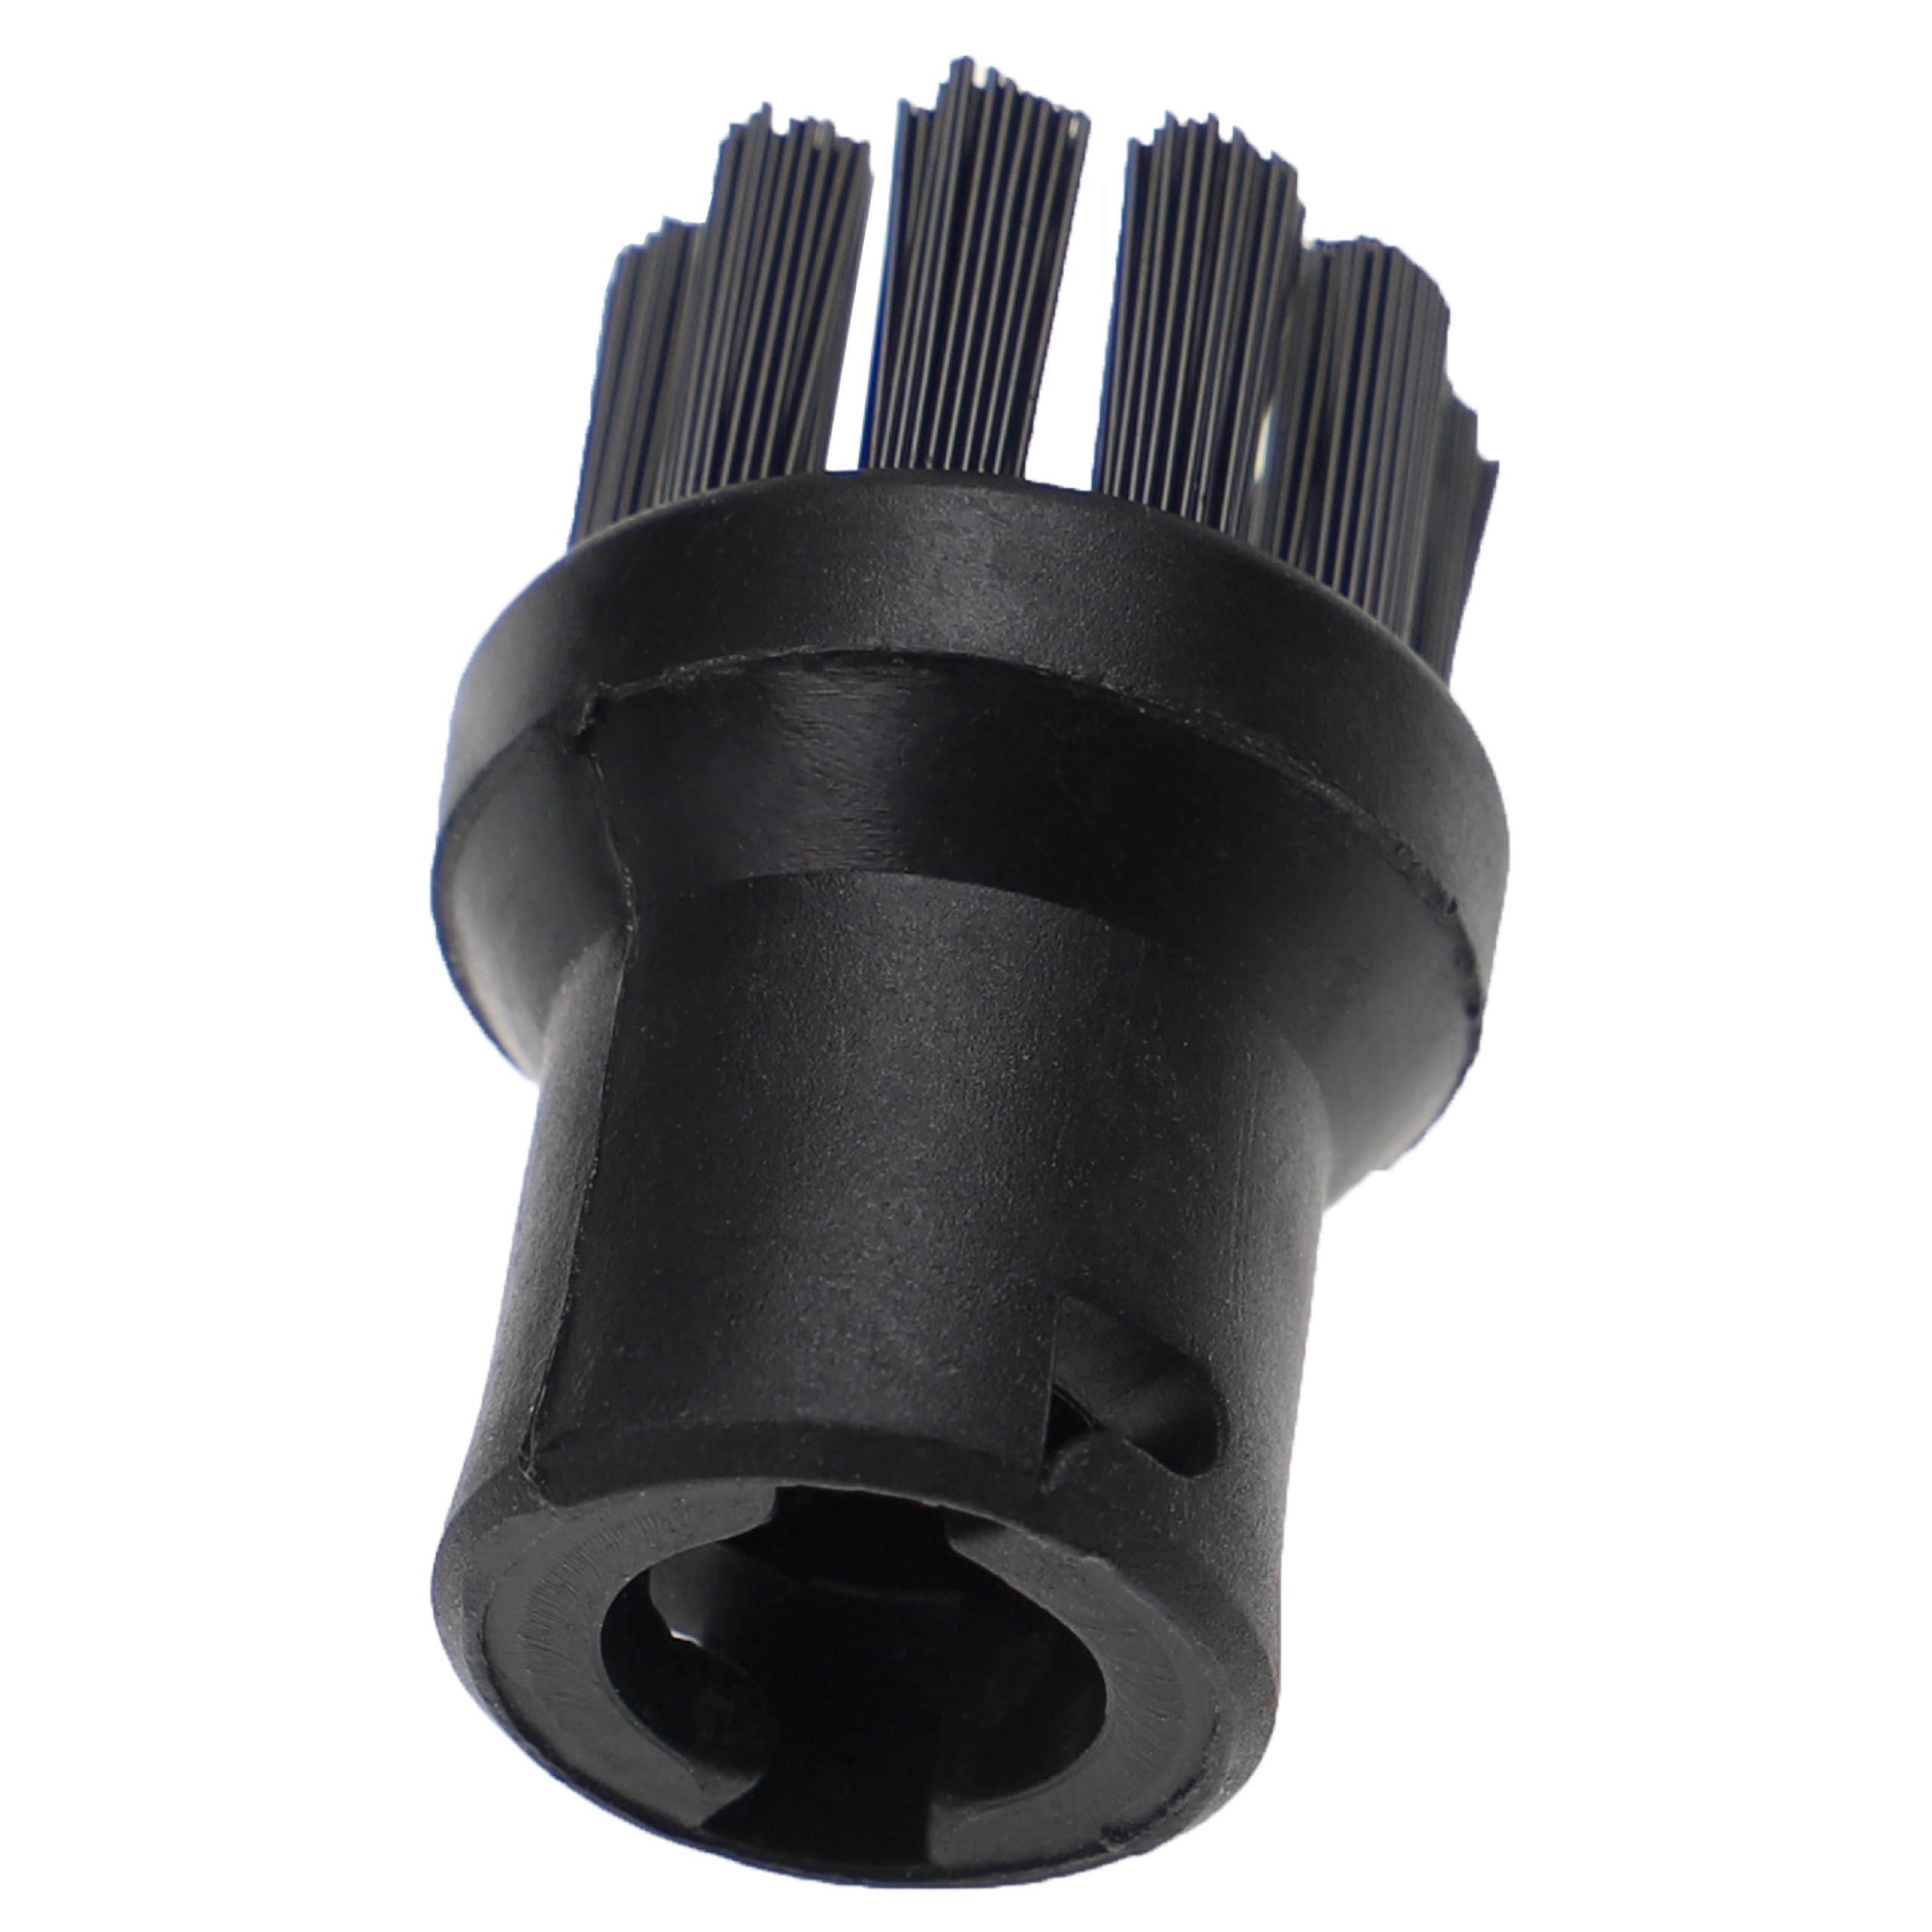 Round Brush as Replacement for Kärcher 2.863-264.0 for Kärcher Steam Cleaner